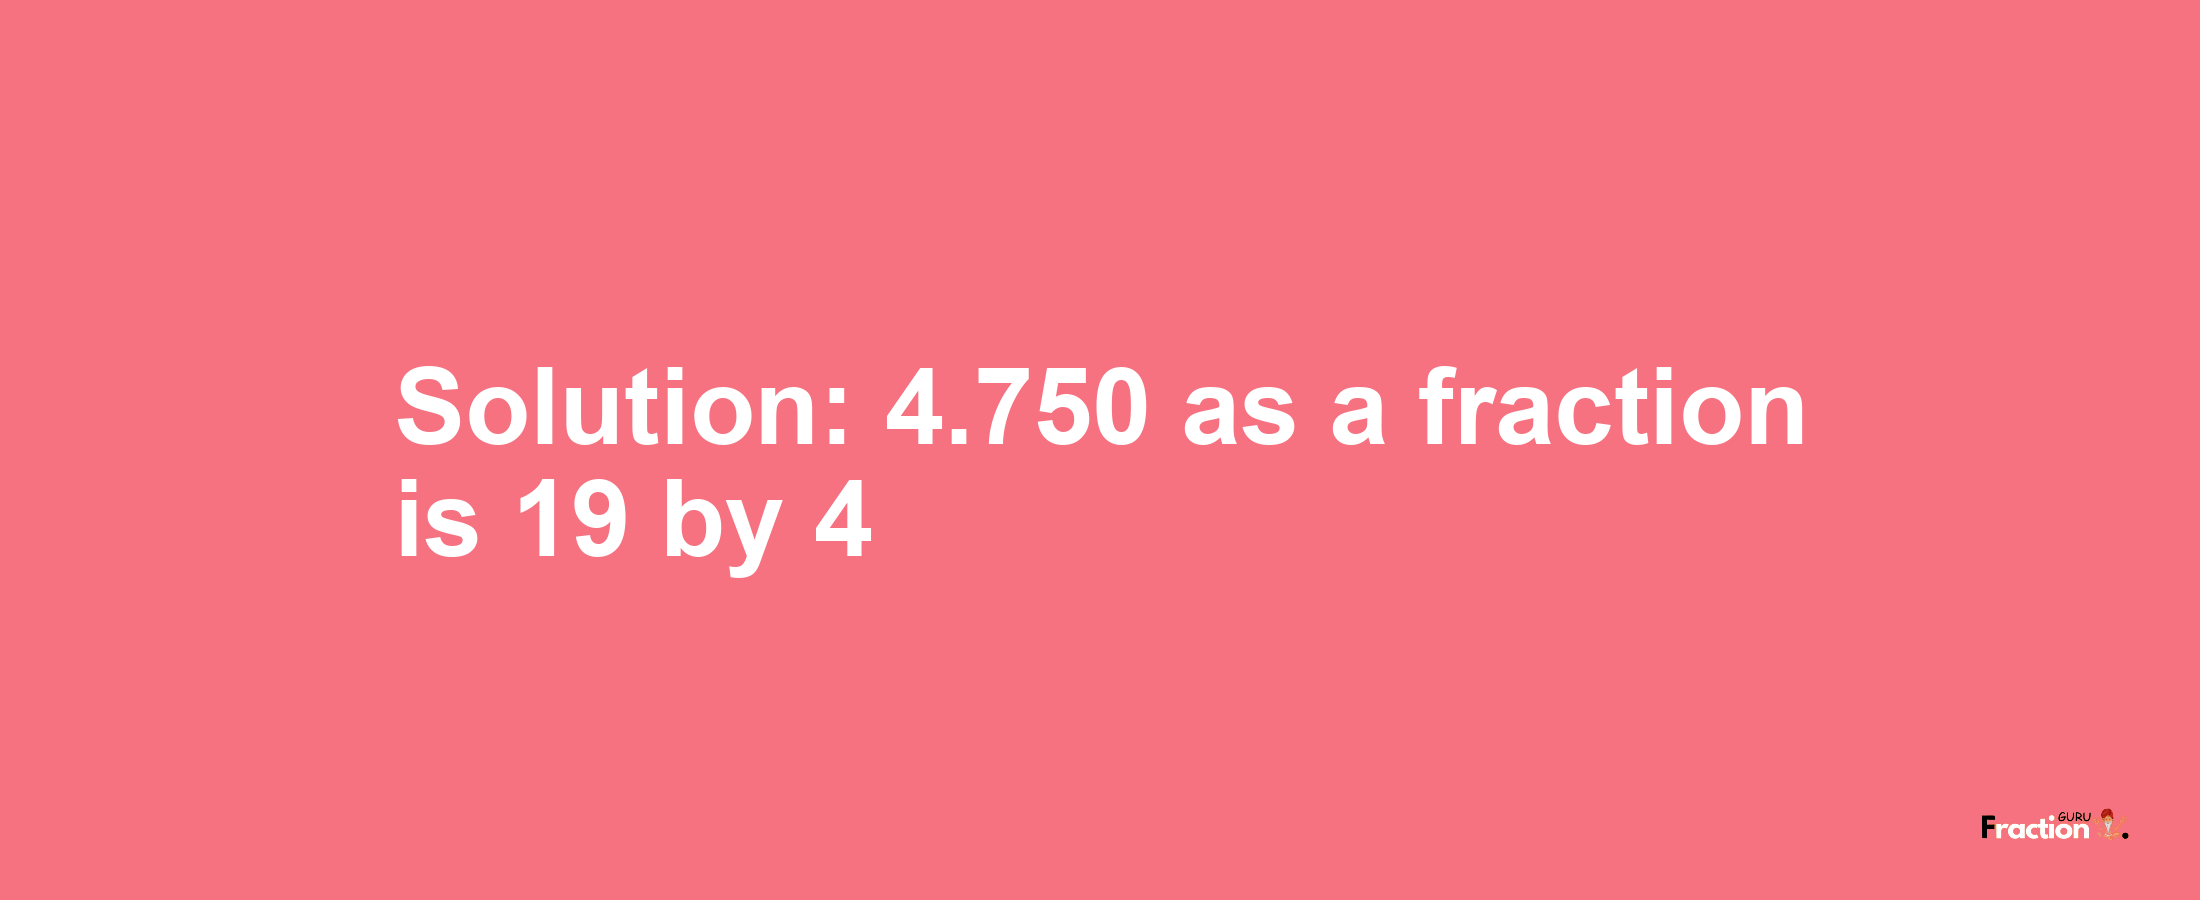 Solution:4.750 as a fraction is 19/4